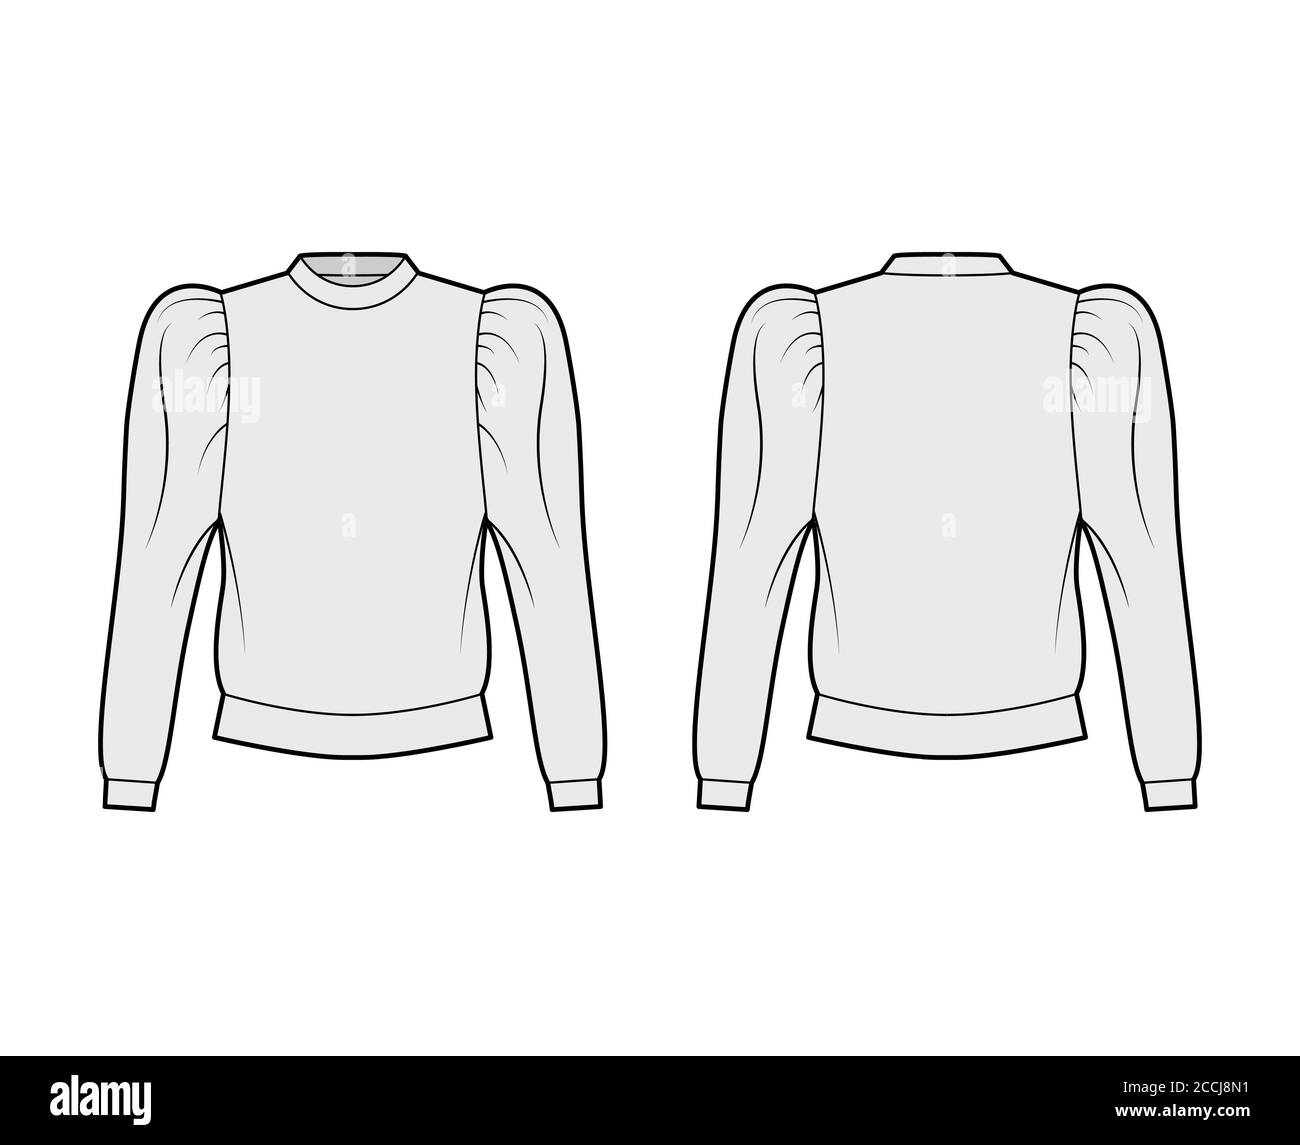 Cotton-jersey sweatshirt technical fashion illustration with relaxed fit, crew neckline, gathered, puffy long sleeves. Flat jumper apparel template front, back grey color. Women, men, unisex top CAD Stock Vector